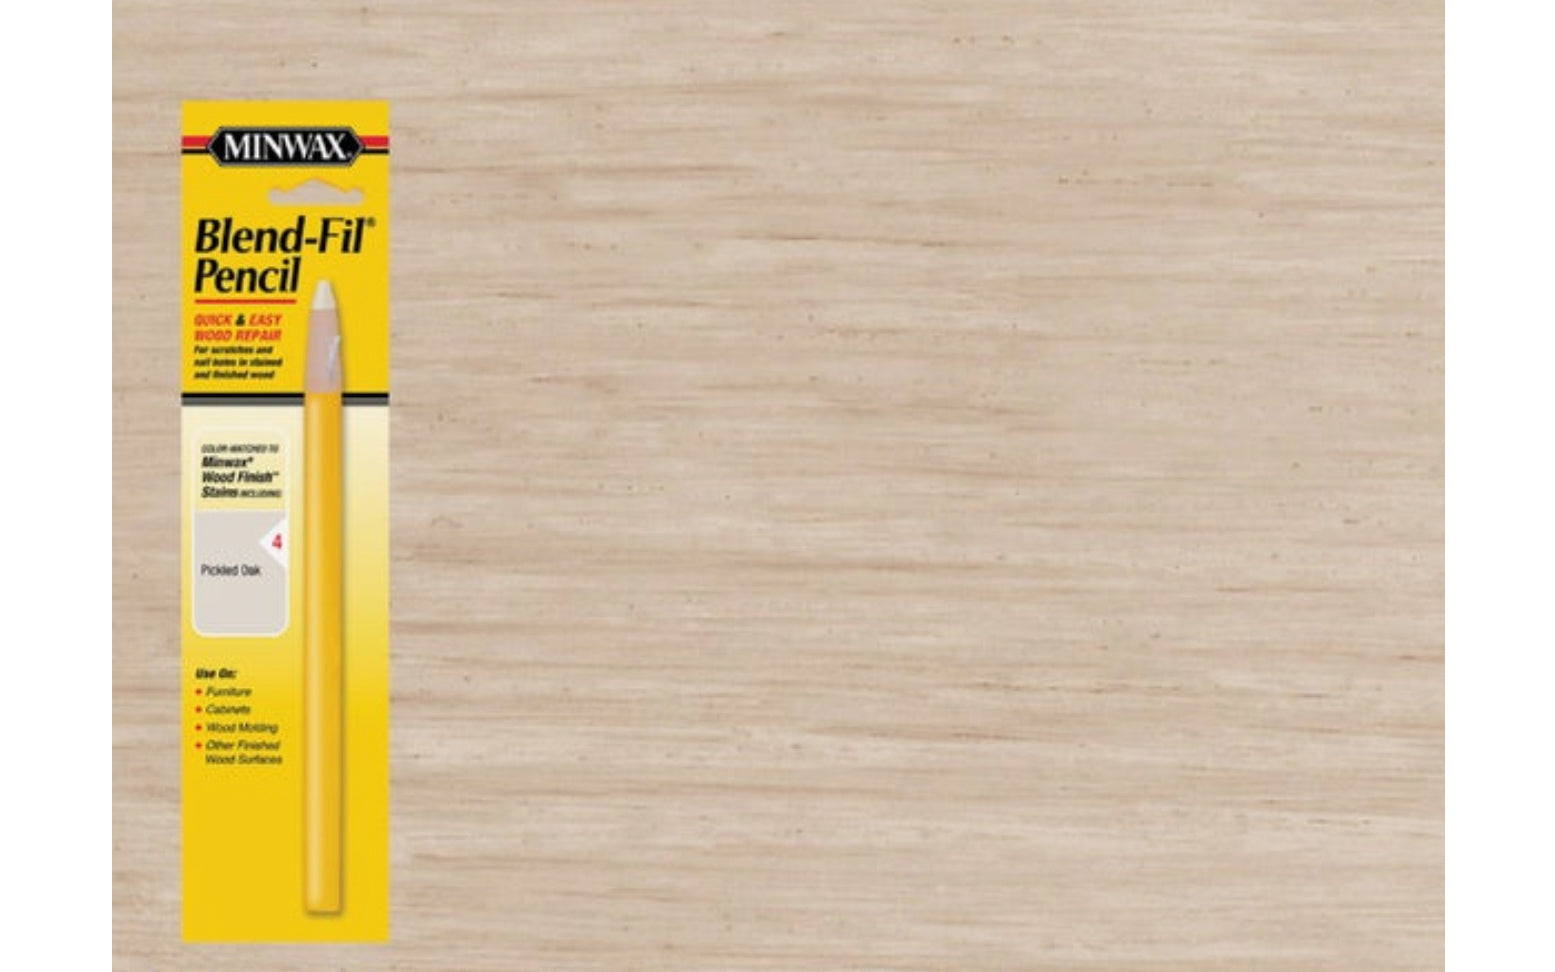 Minwax Blend-Fil Pencil - No. 4 blend. Color-matched to stains: Pickled Oak. For use on furniture, cabinets, wood molding, other finished wood surfaces. 